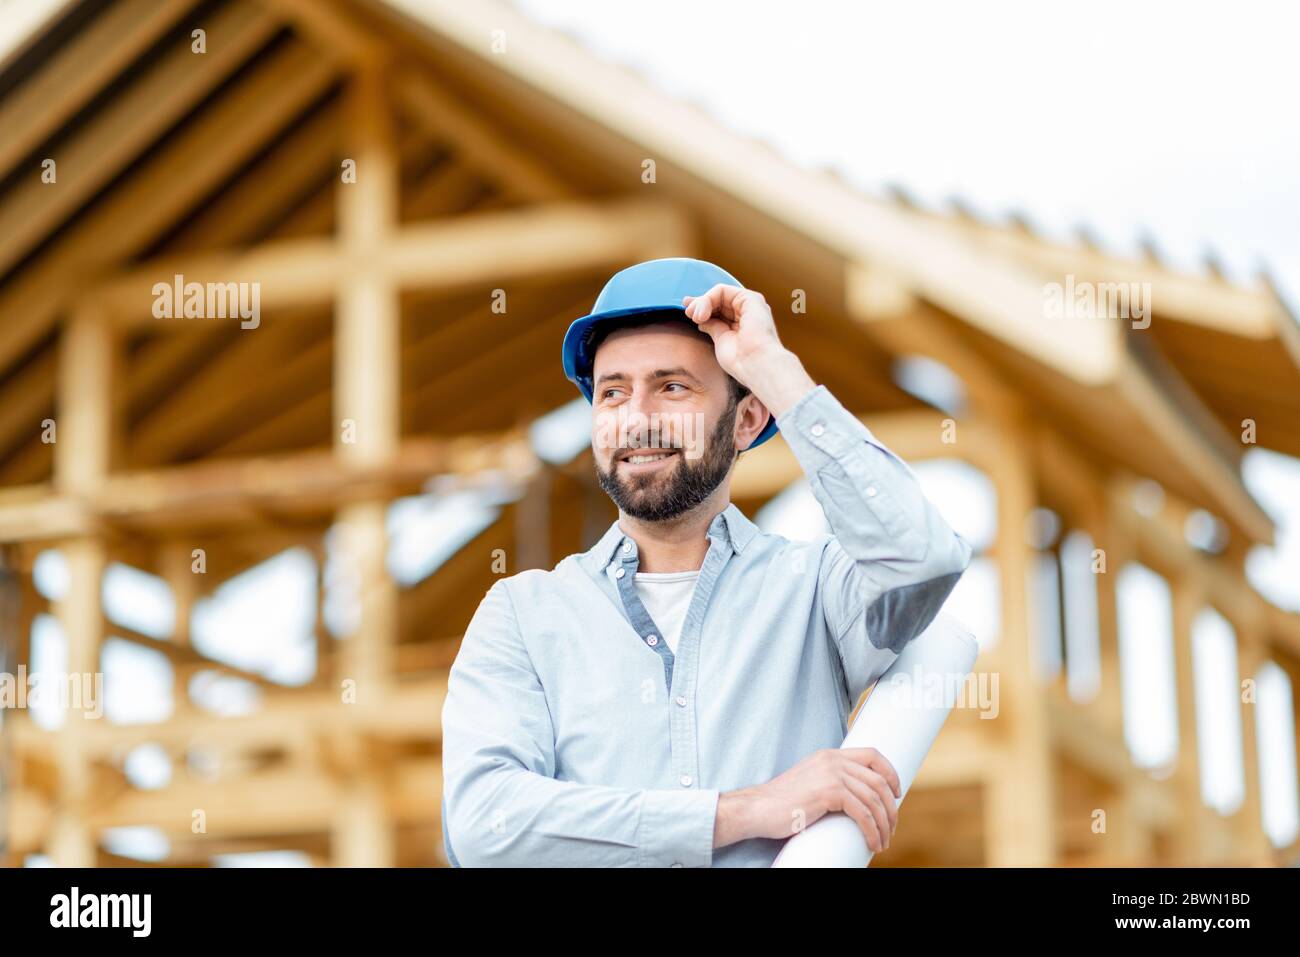 Portrait of an architect or builder in hard hat standing in front of the wooden house structure. Building and designing wooden frame house concept Stock Photo